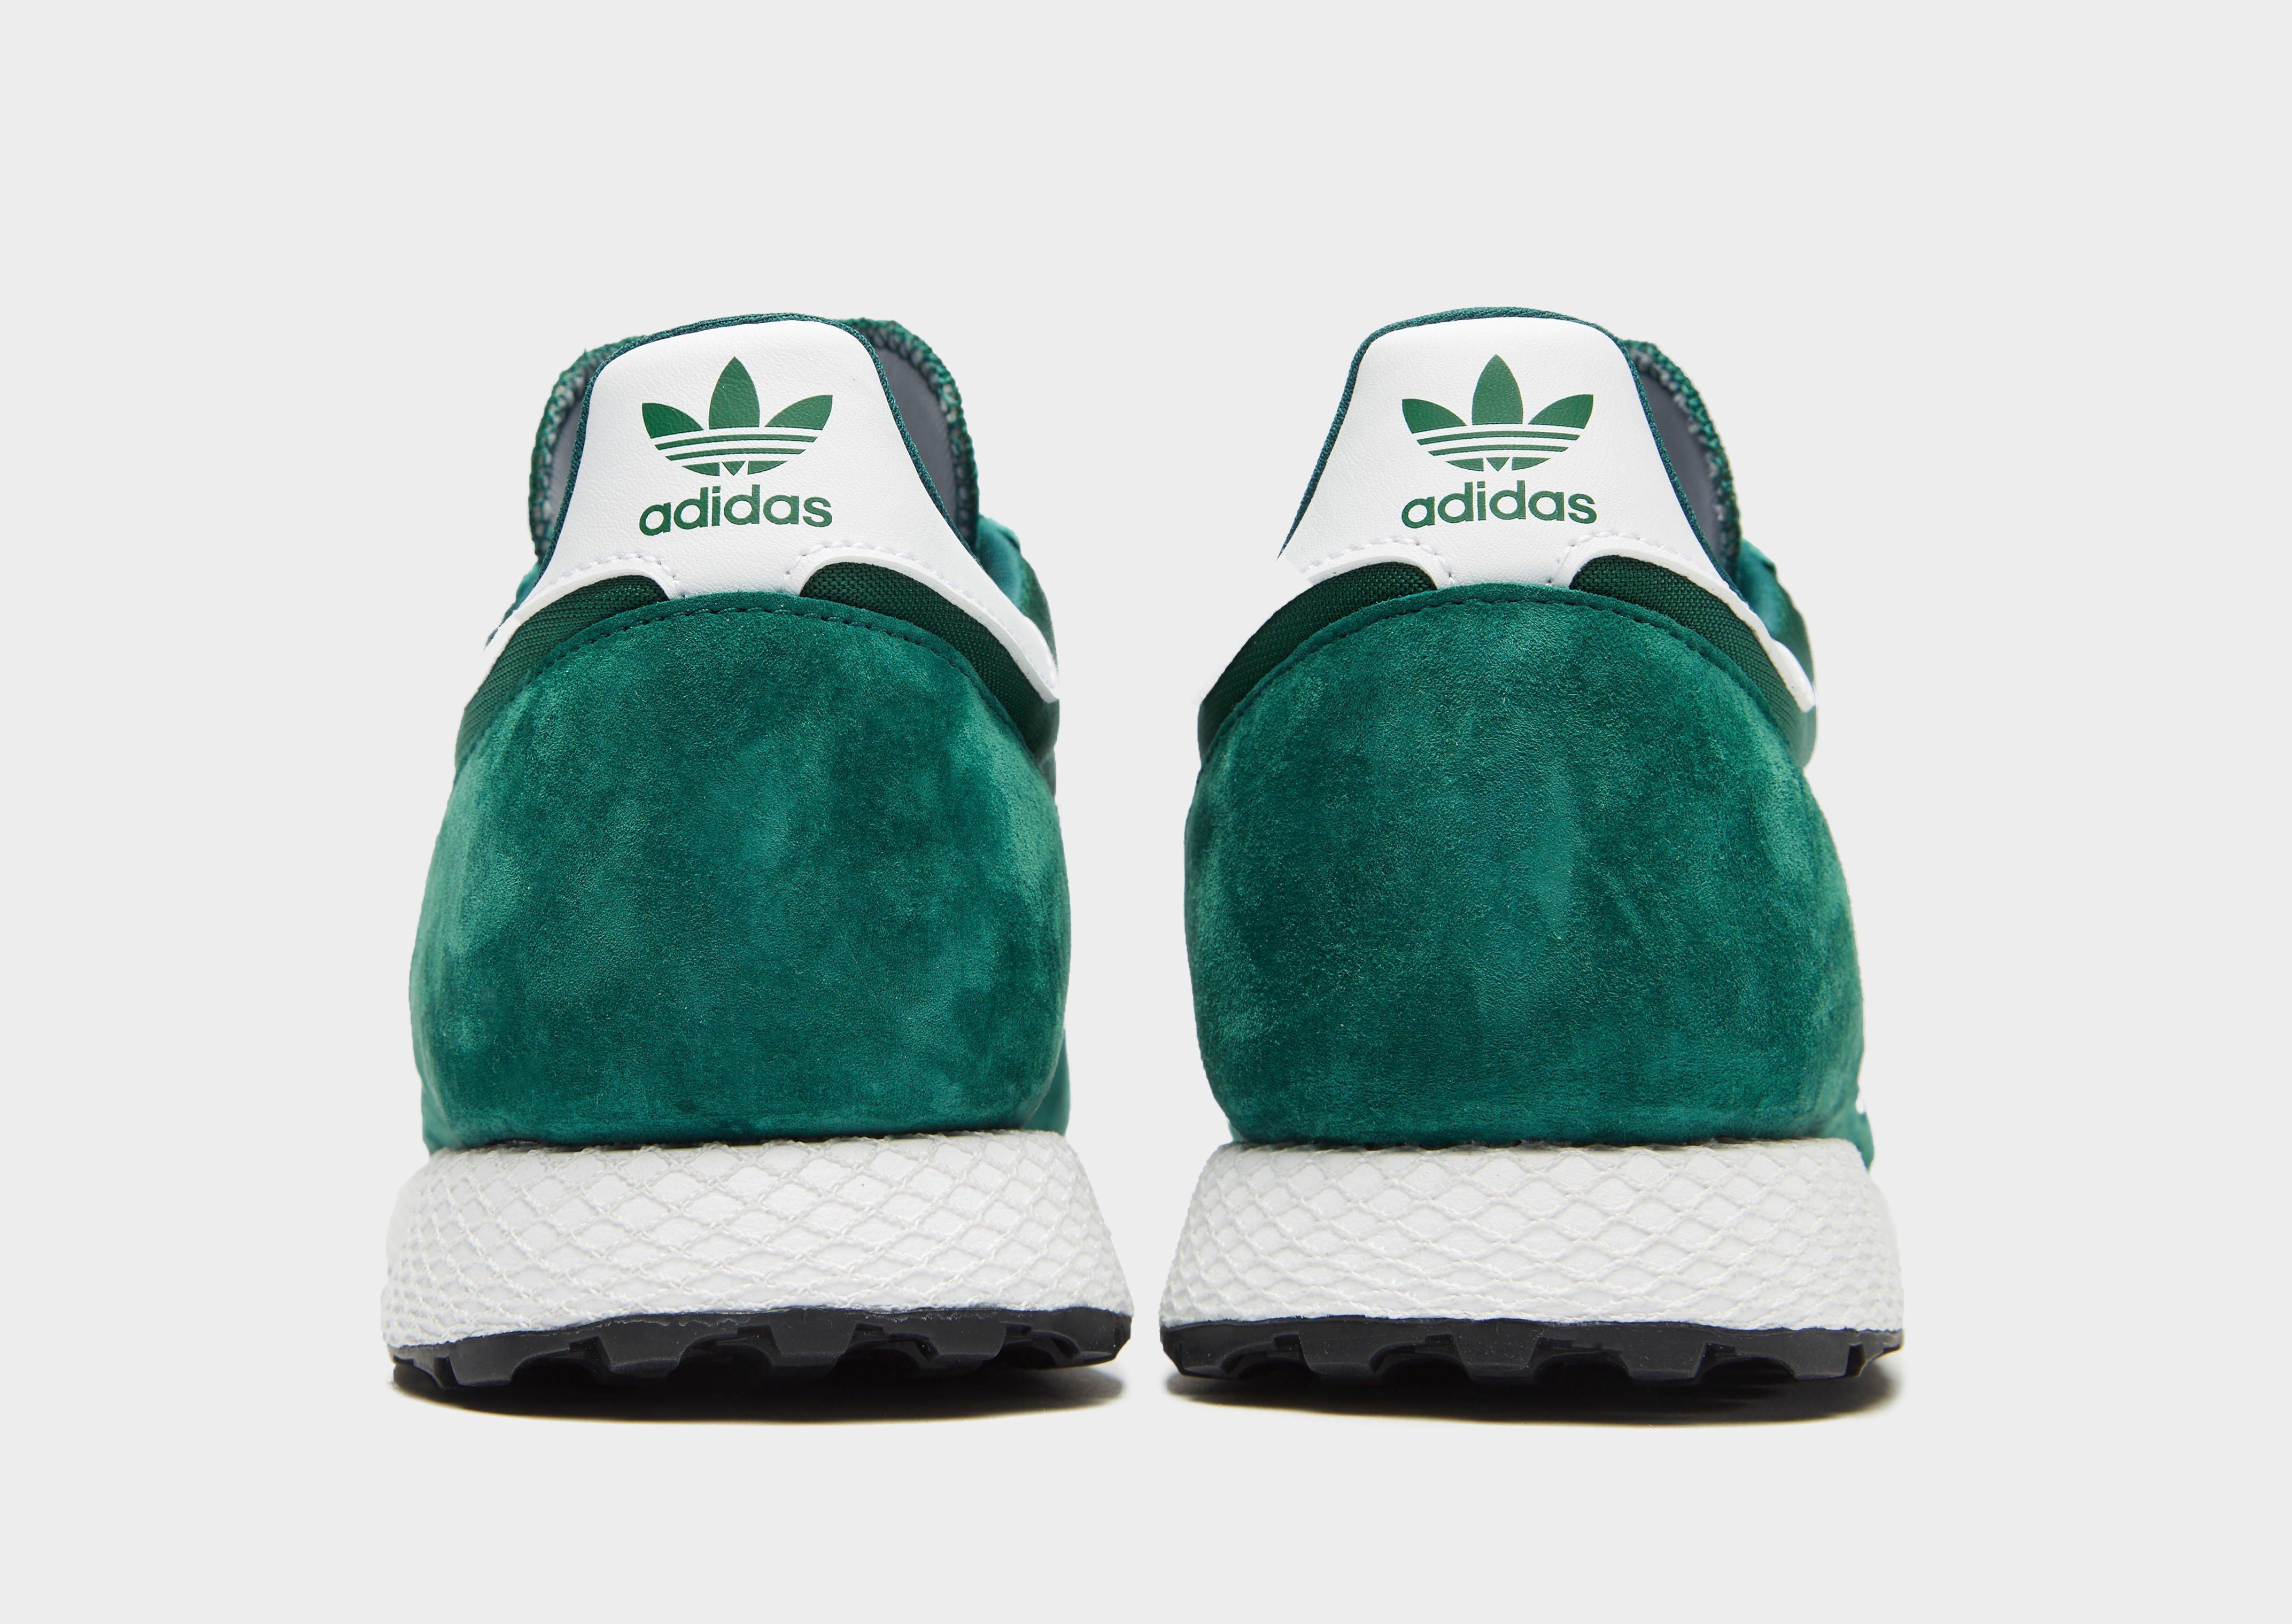 adidas forest grove white green